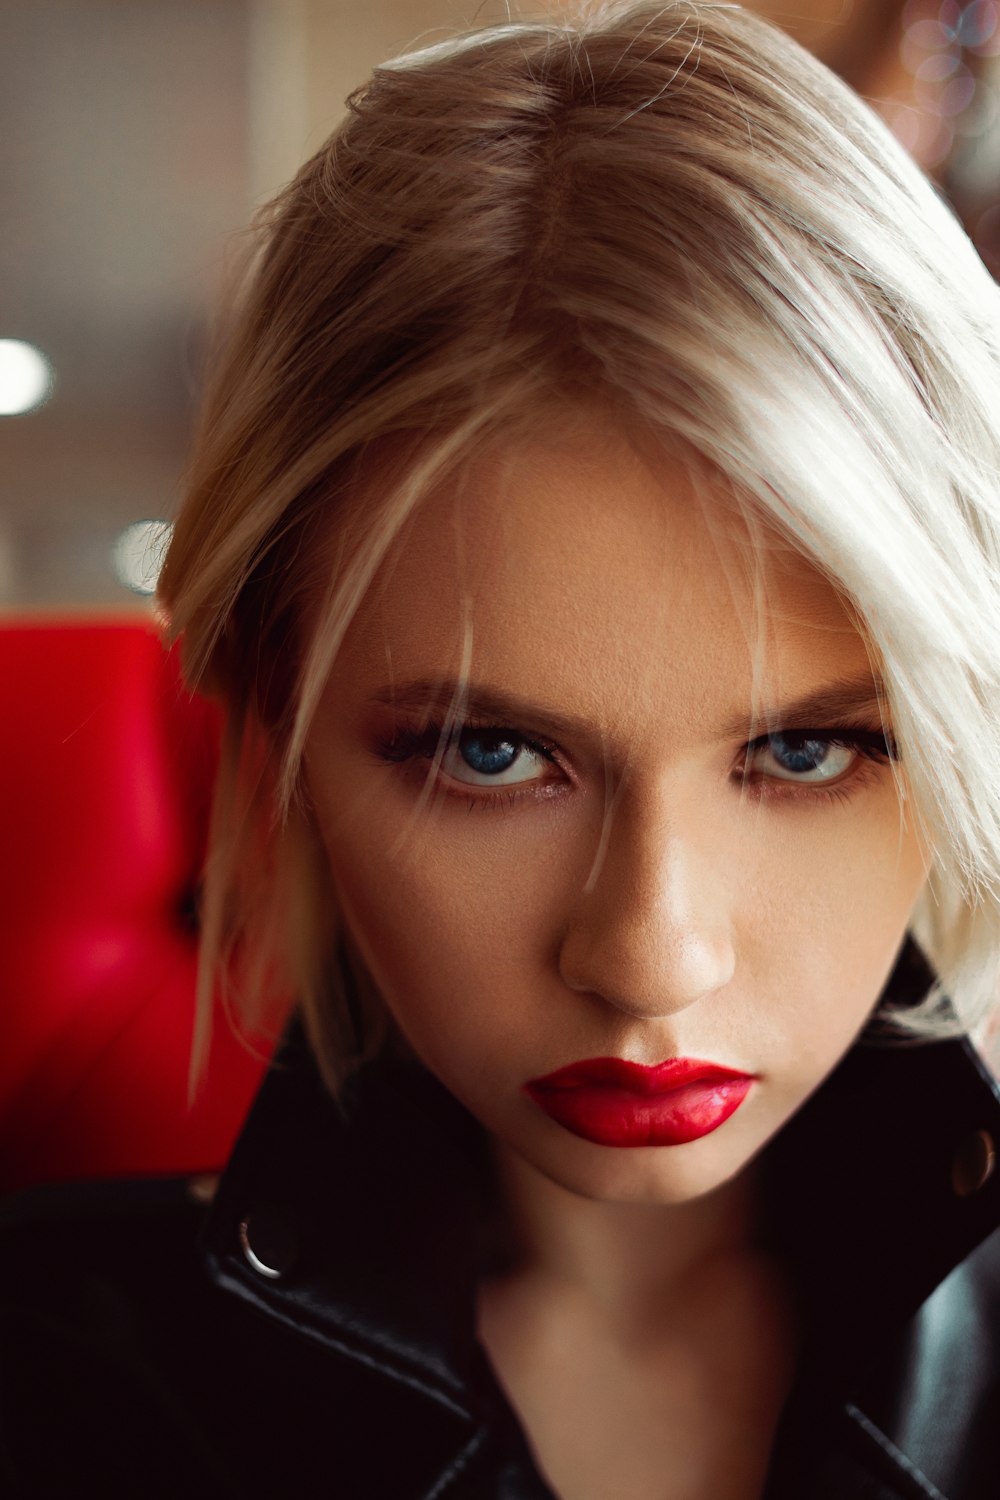 Woman With Blonde Hair Wearing Red Lipstick Photo Free Red Lips Image On Unsplash